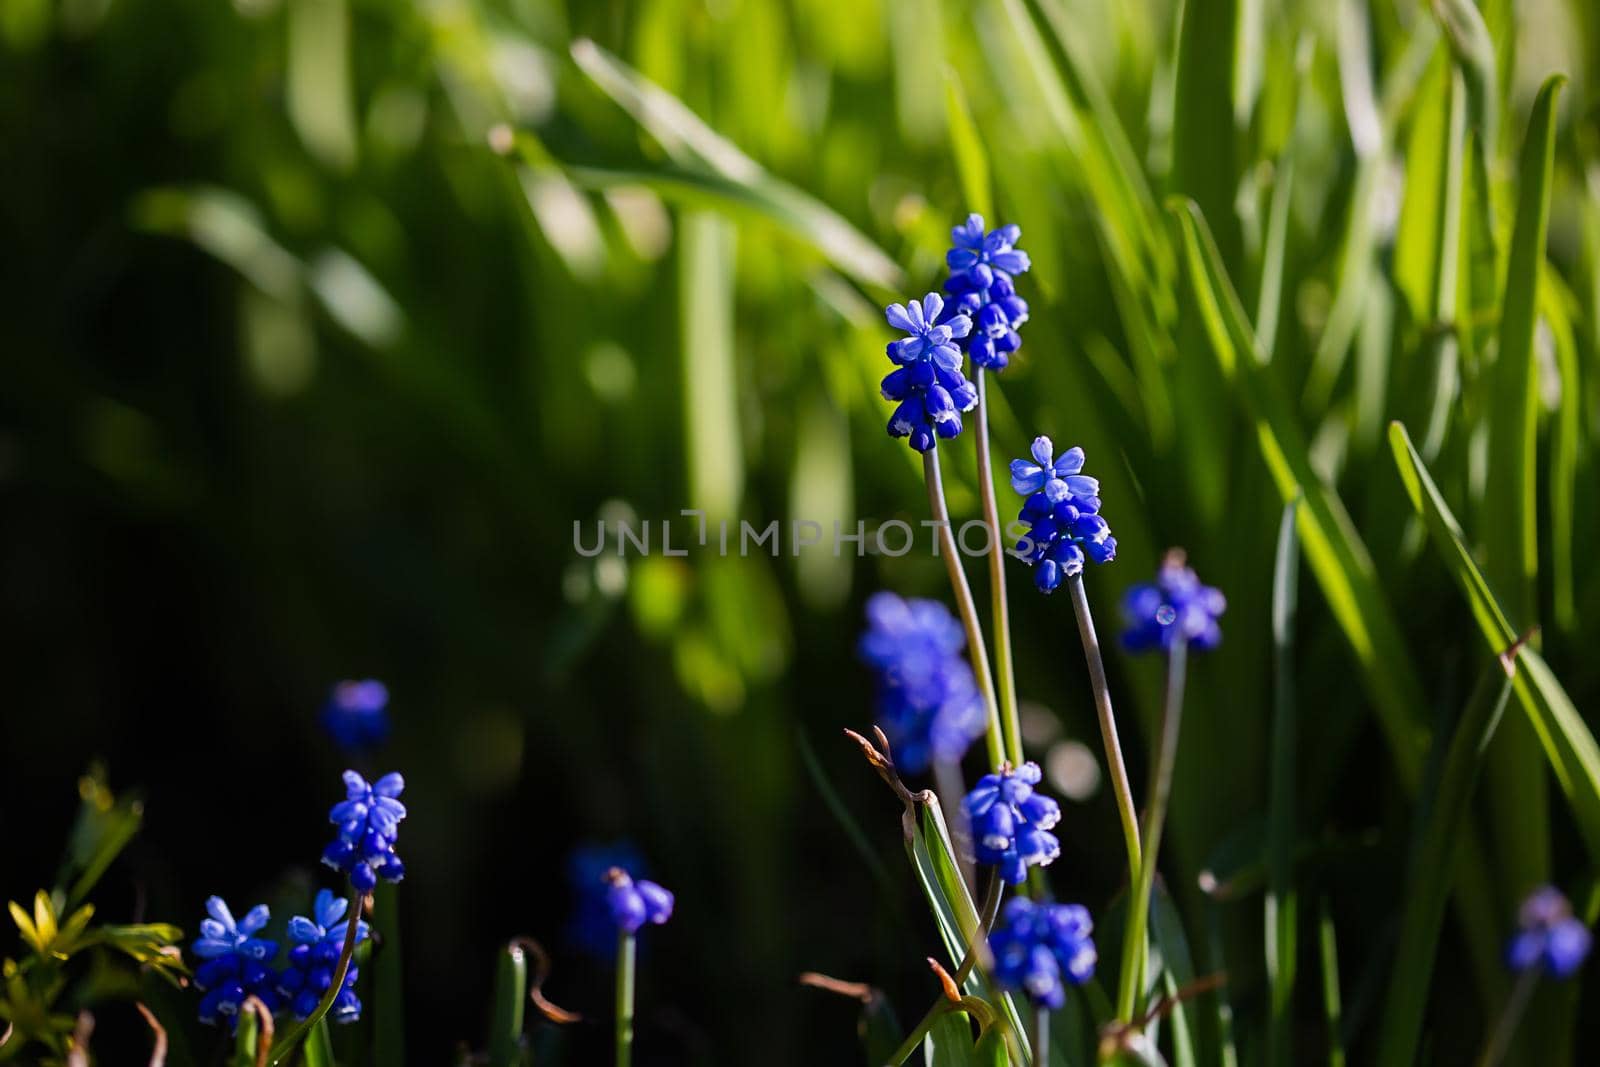 Muscari Hyacinth blue flowers grow on a flower bed in spring, beautiful light falls, place for text, selective focus, blurred background